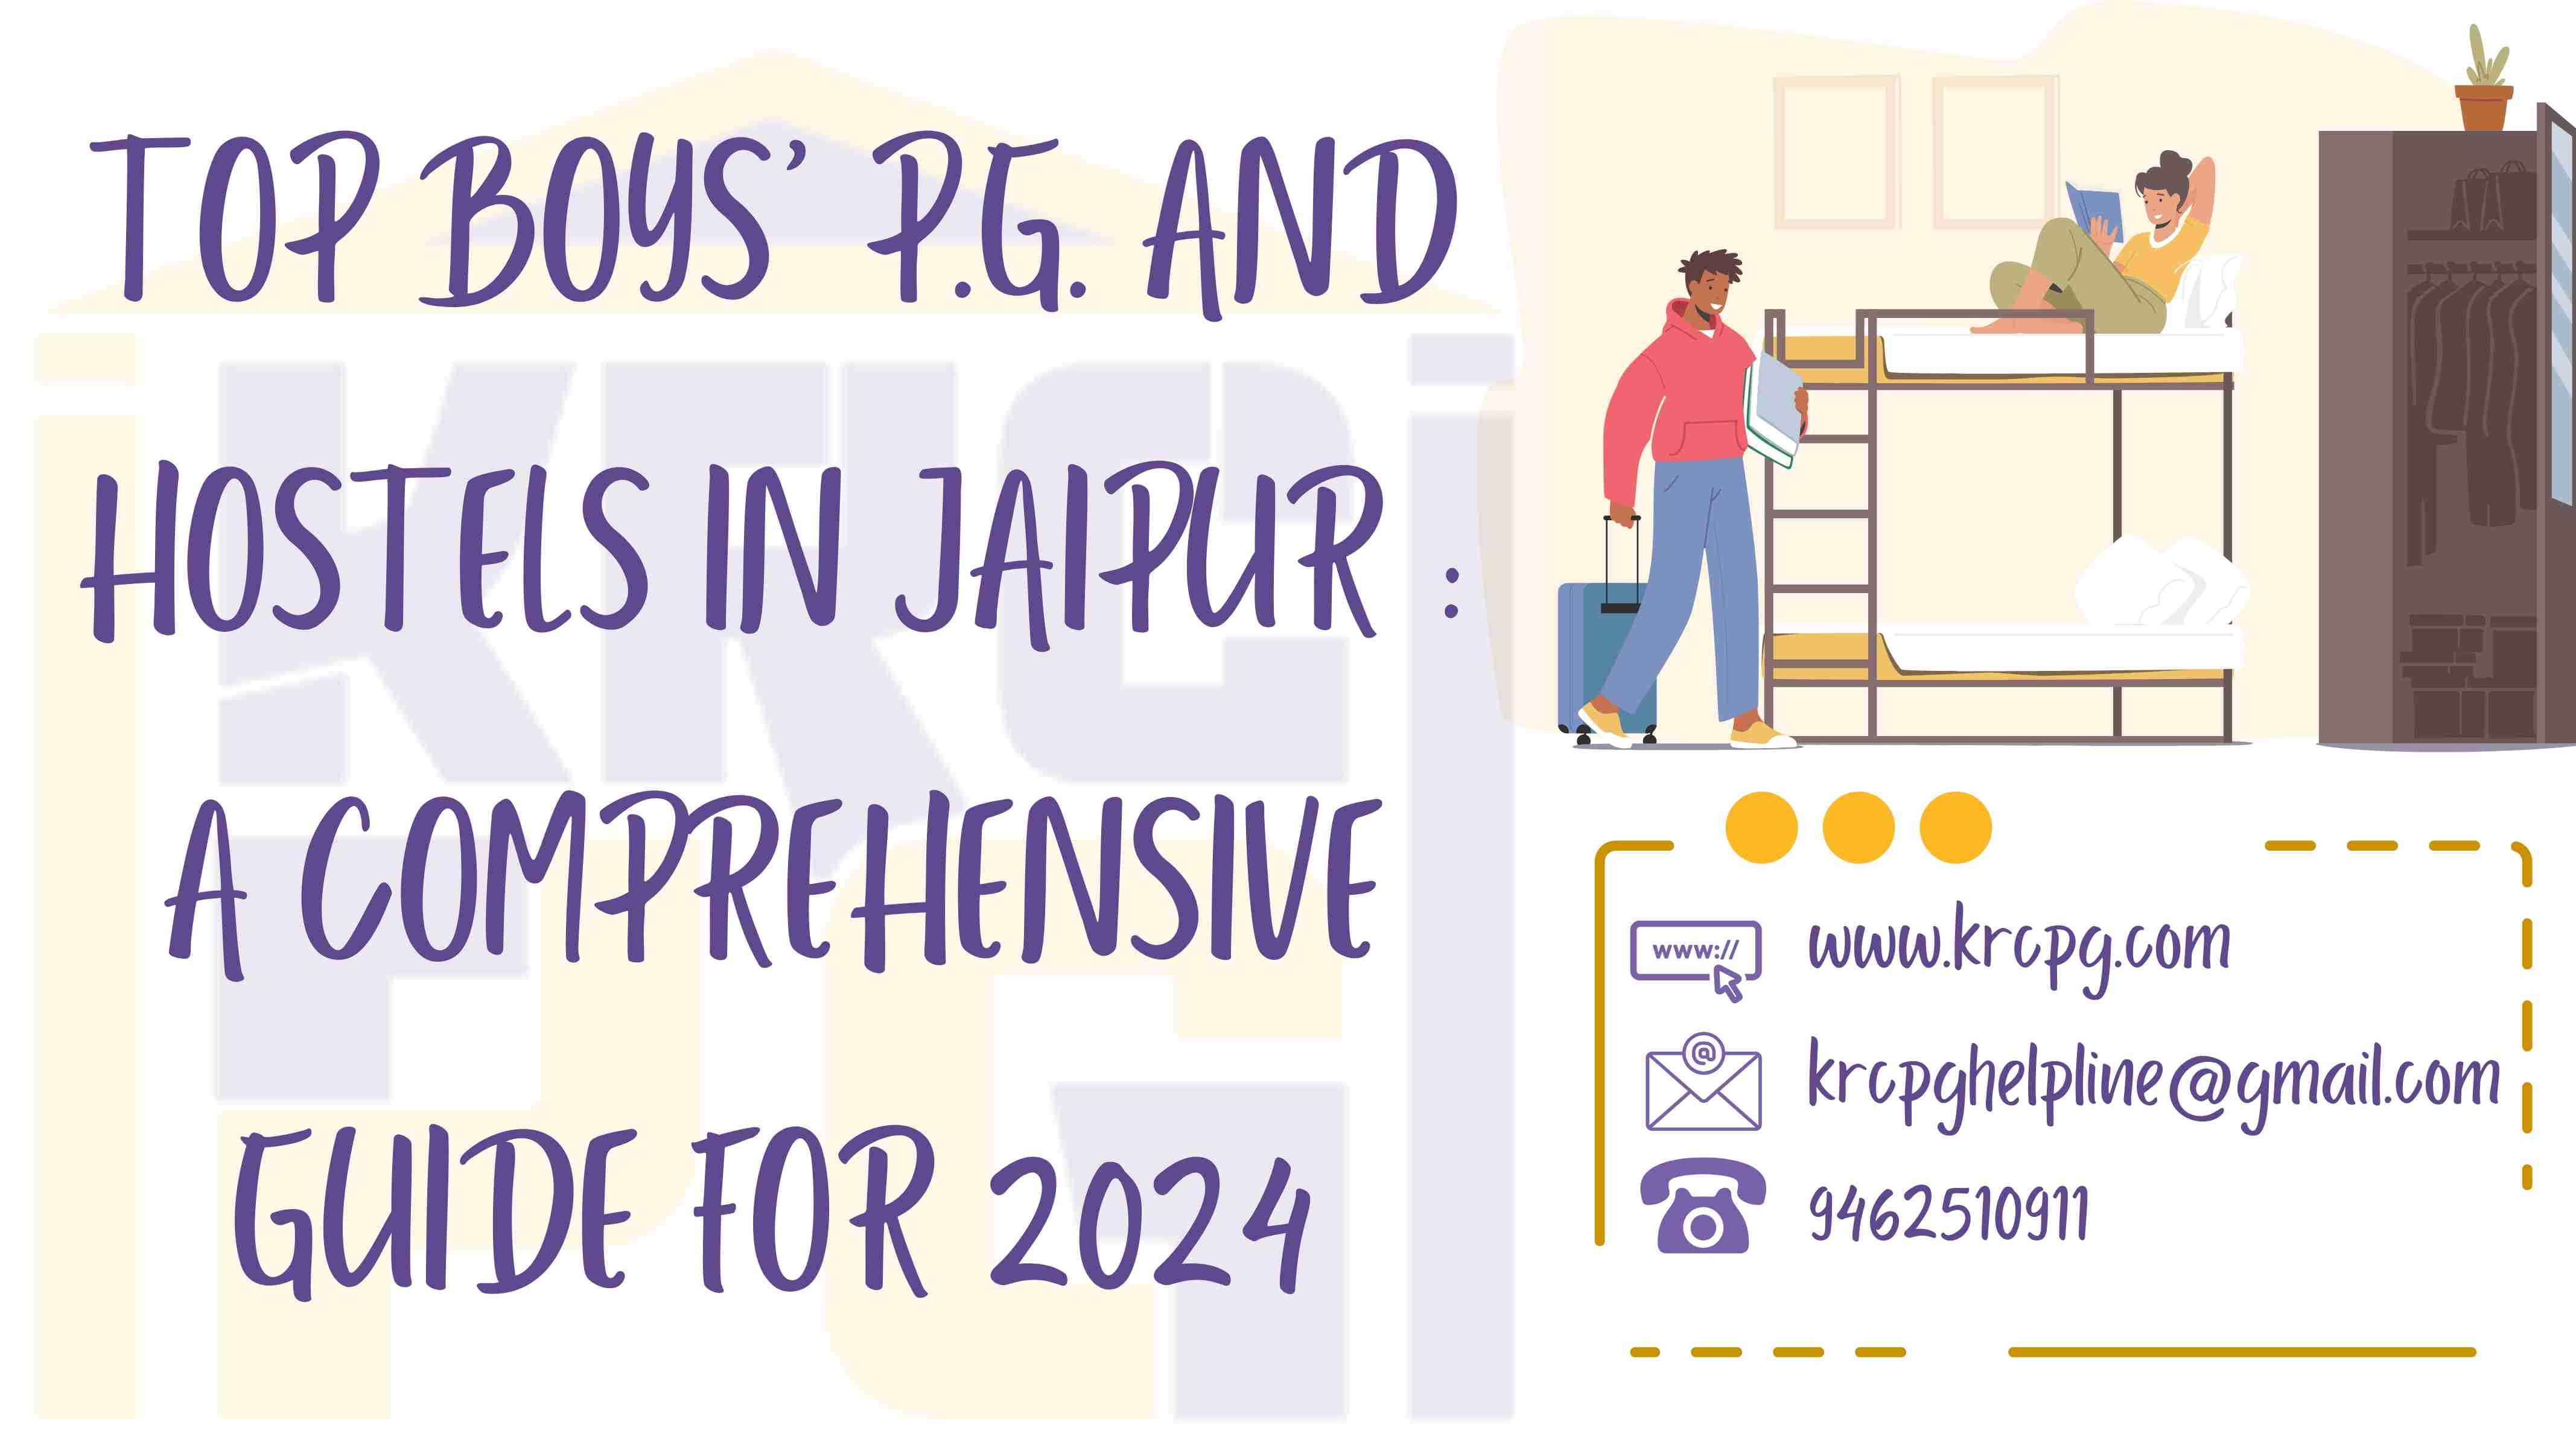 Top Boys’ P.G. and Hostels in Jaipur: A Comprehensive Guide for 2024